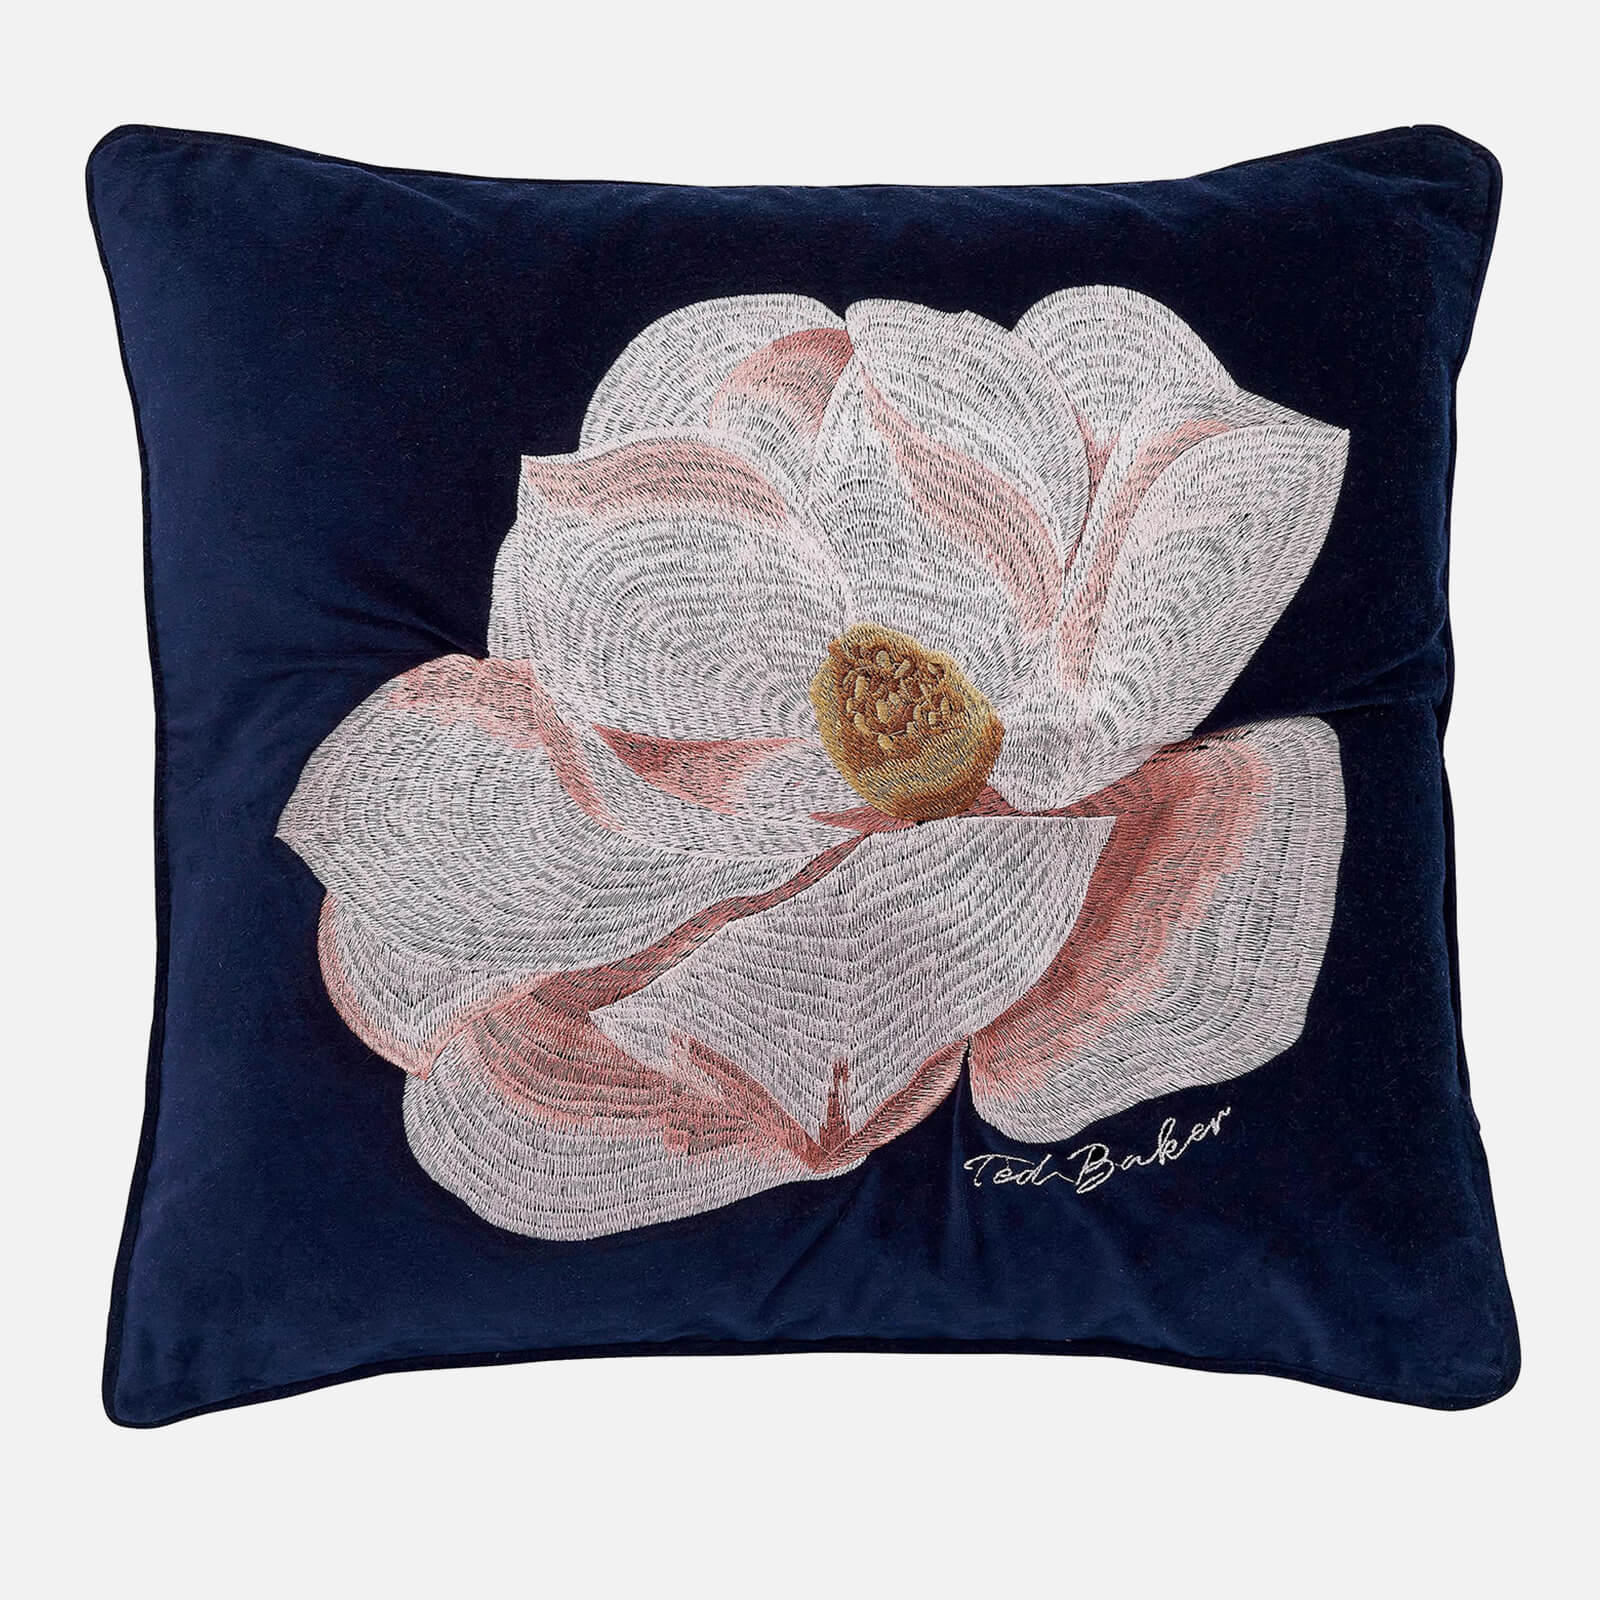 Ted Baker Opal Floral Cushion - 45X45cm - Navy von Ted Baker